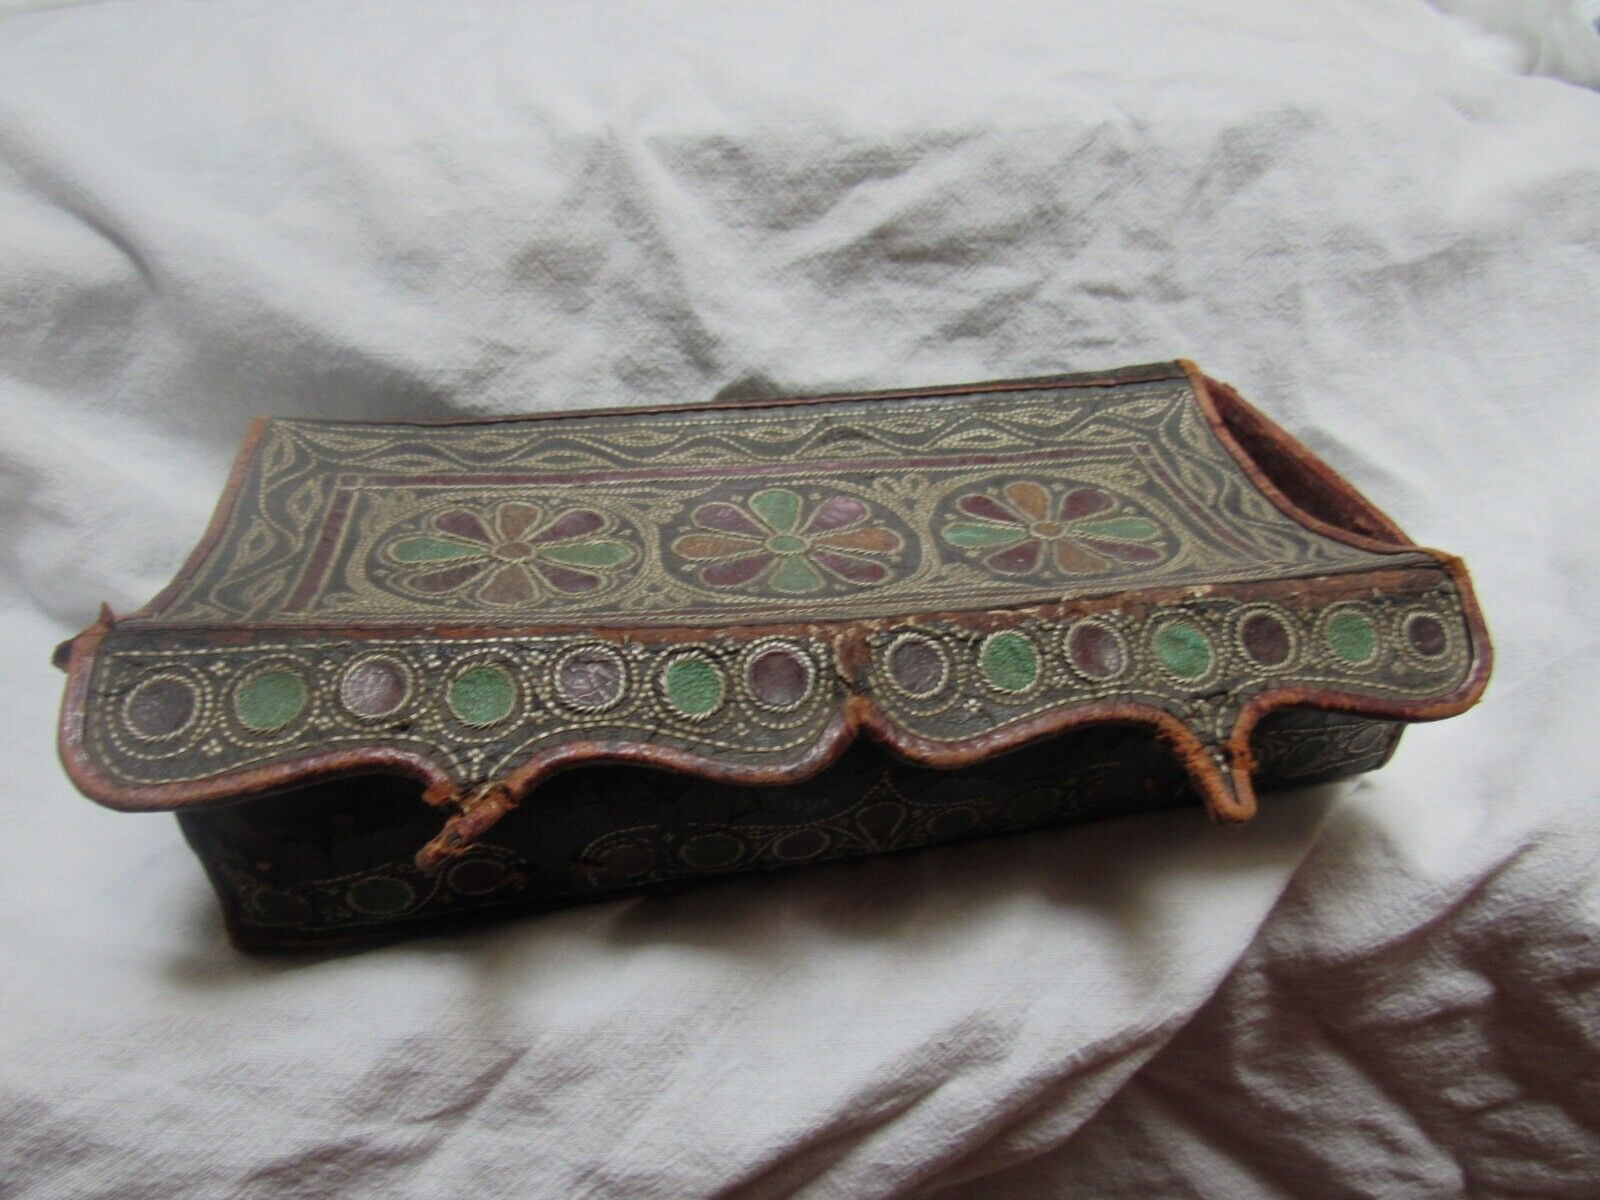 Antique Document Box Or ? Colored Leather with Elaborate Stitching Design 